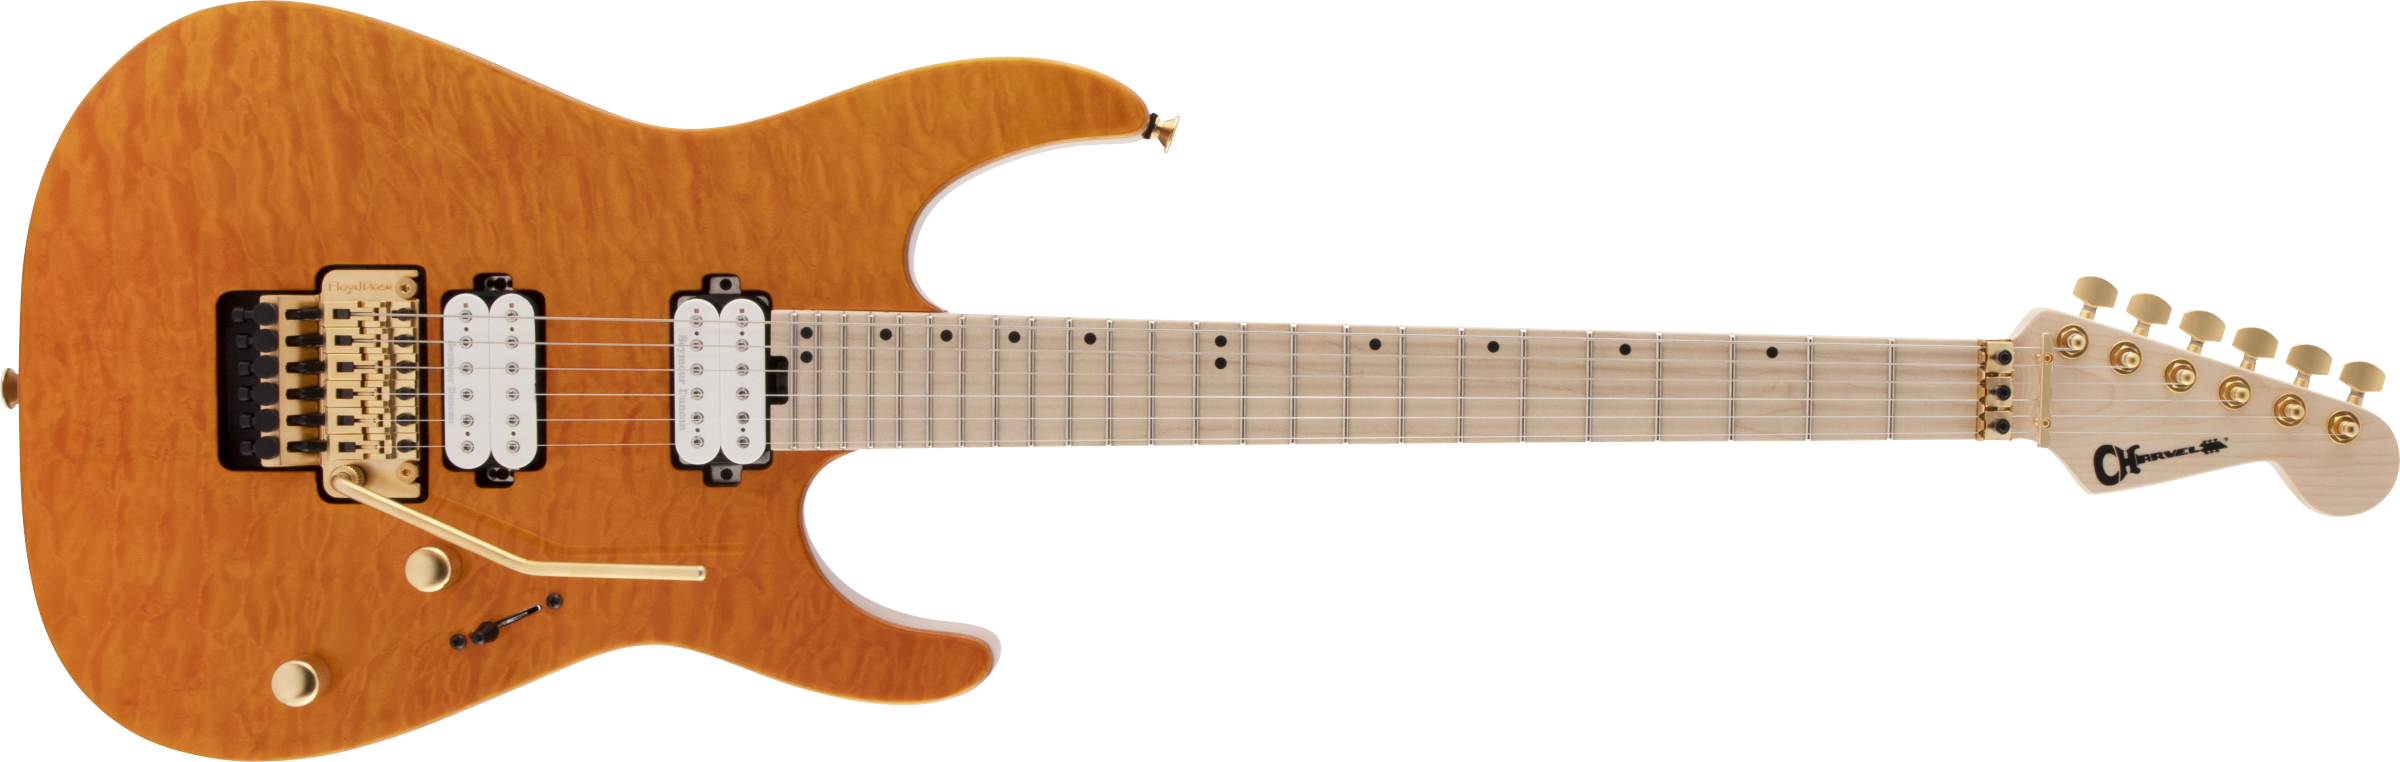 Charvel Pro-Mod DK24 HH FR M Mahogany with Quilt Maple Maple Fingerboard Dark Amber 2969431558 SERIAL NUMBER MC24000639